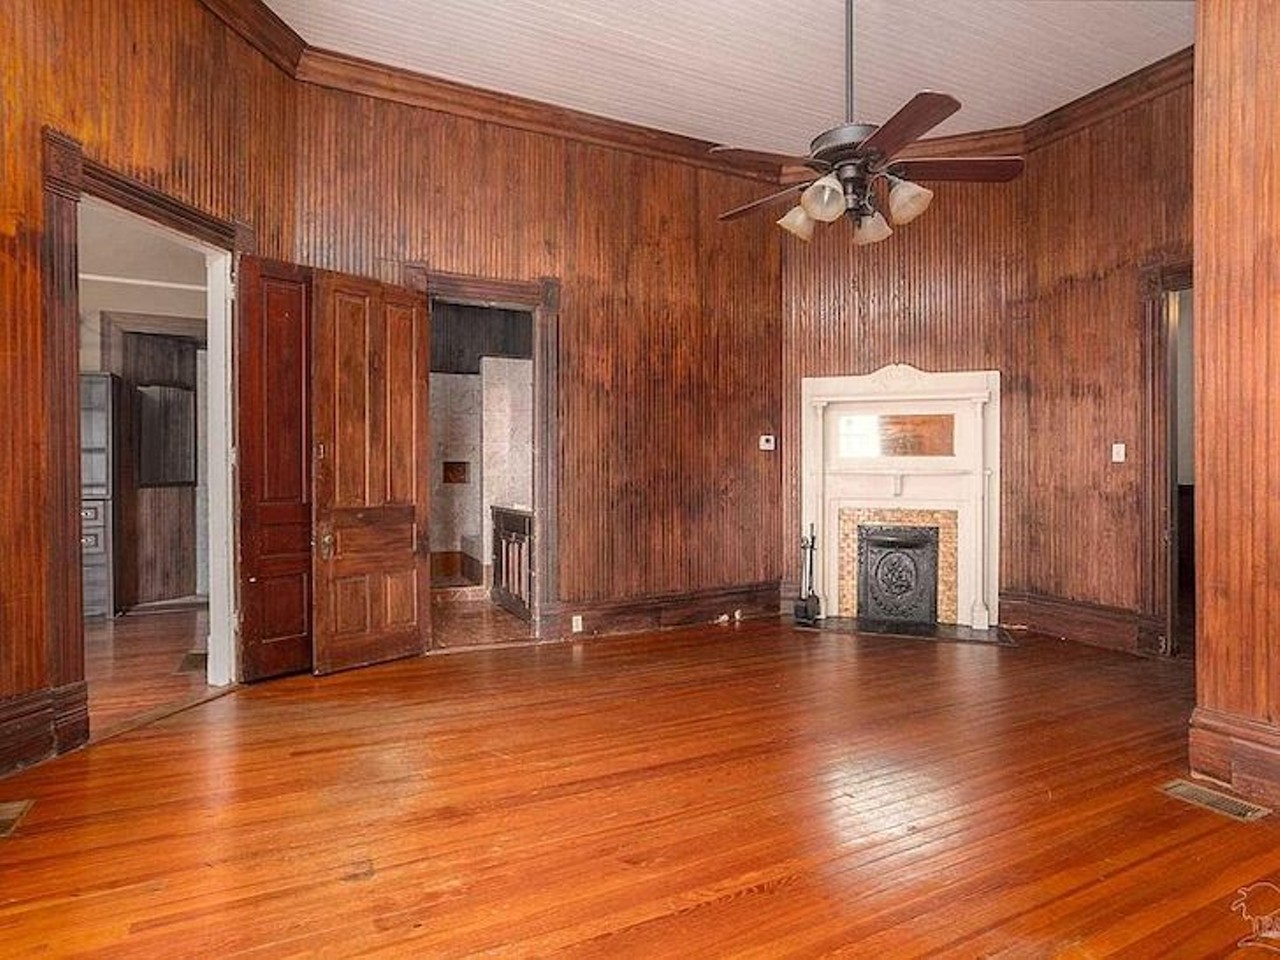 A historic Florida 'haunted house' is for sale, and it comes with a ghost named 'Fred'